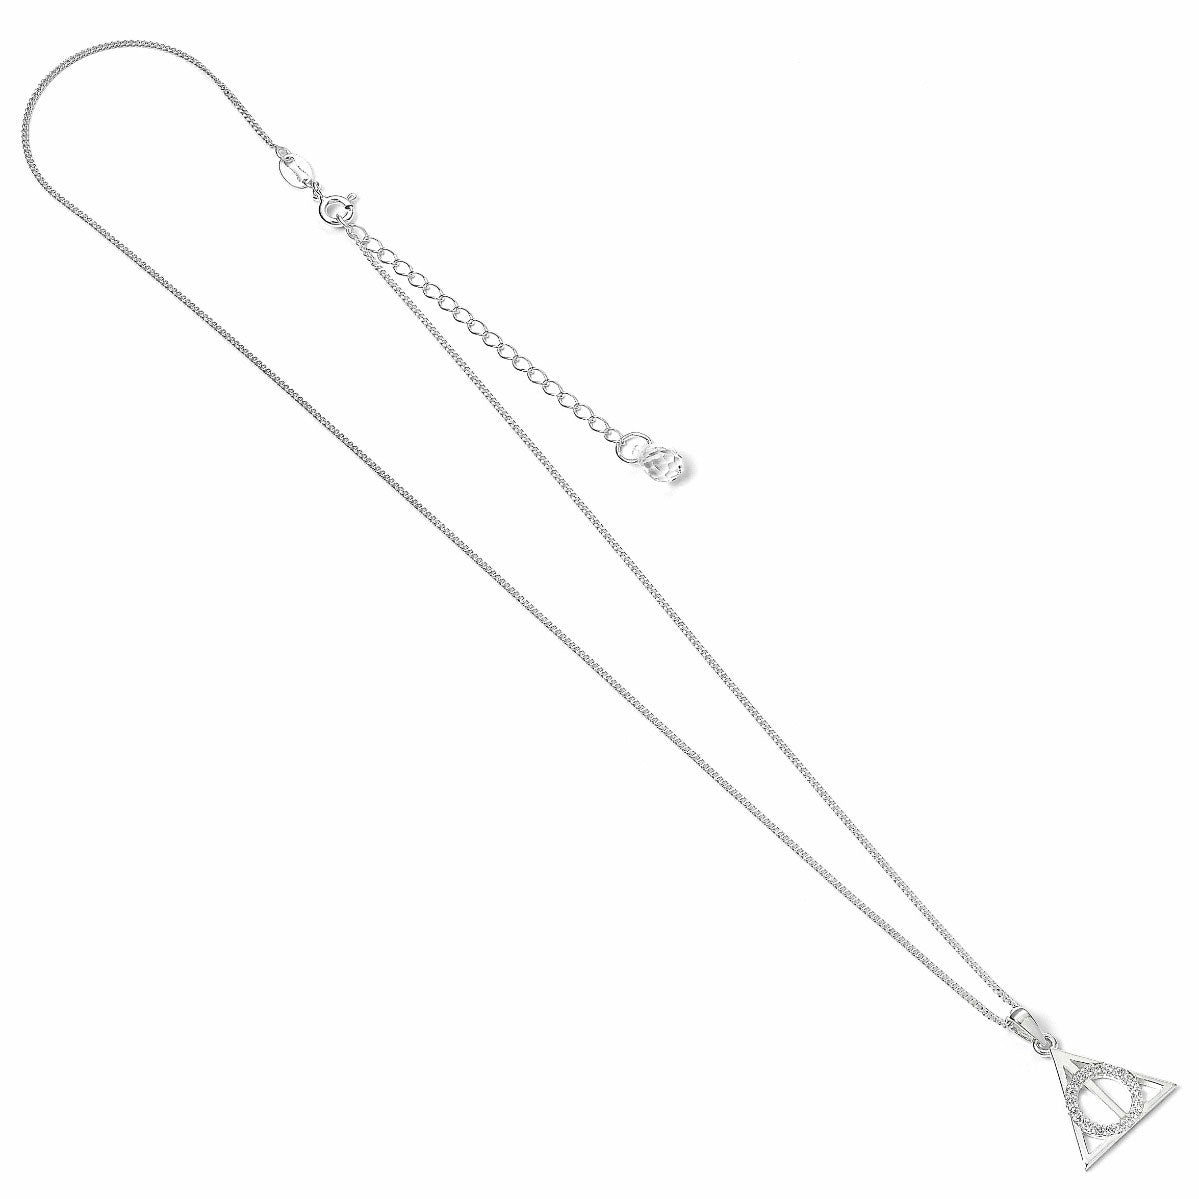 Deathly Hallows Crystal Necklace